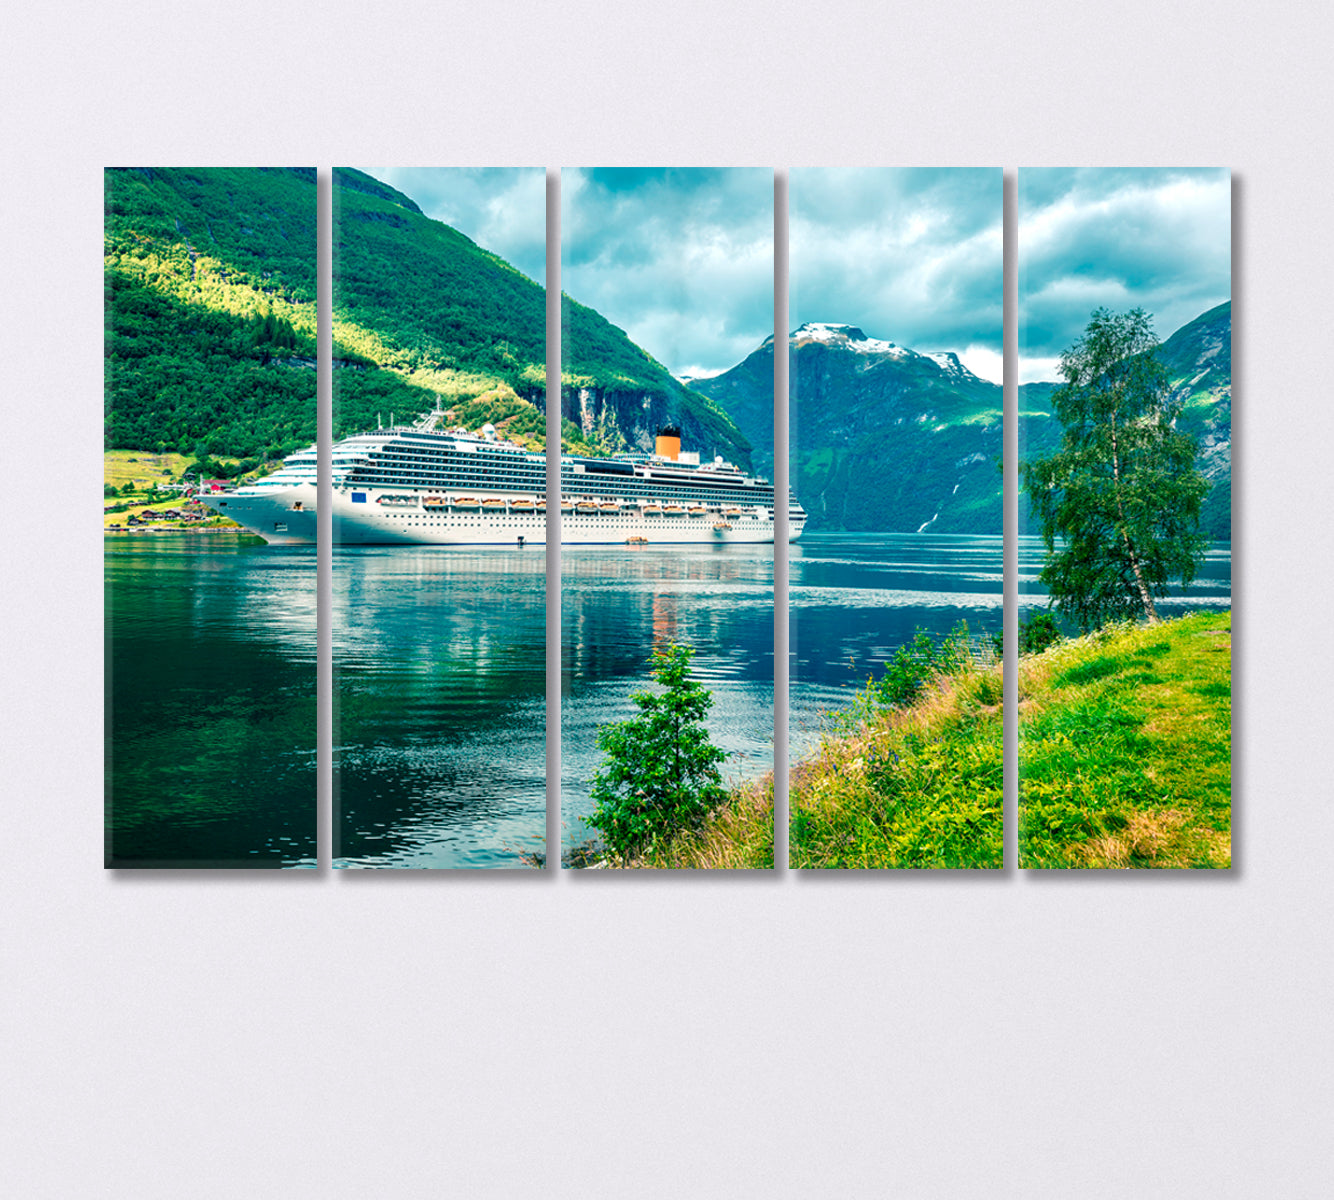 Green Geiranger Fjord with Cruise Ship Norway Canvas Print-Canvas Print-CetArt-5 Panels-36x24 inches-CetArt